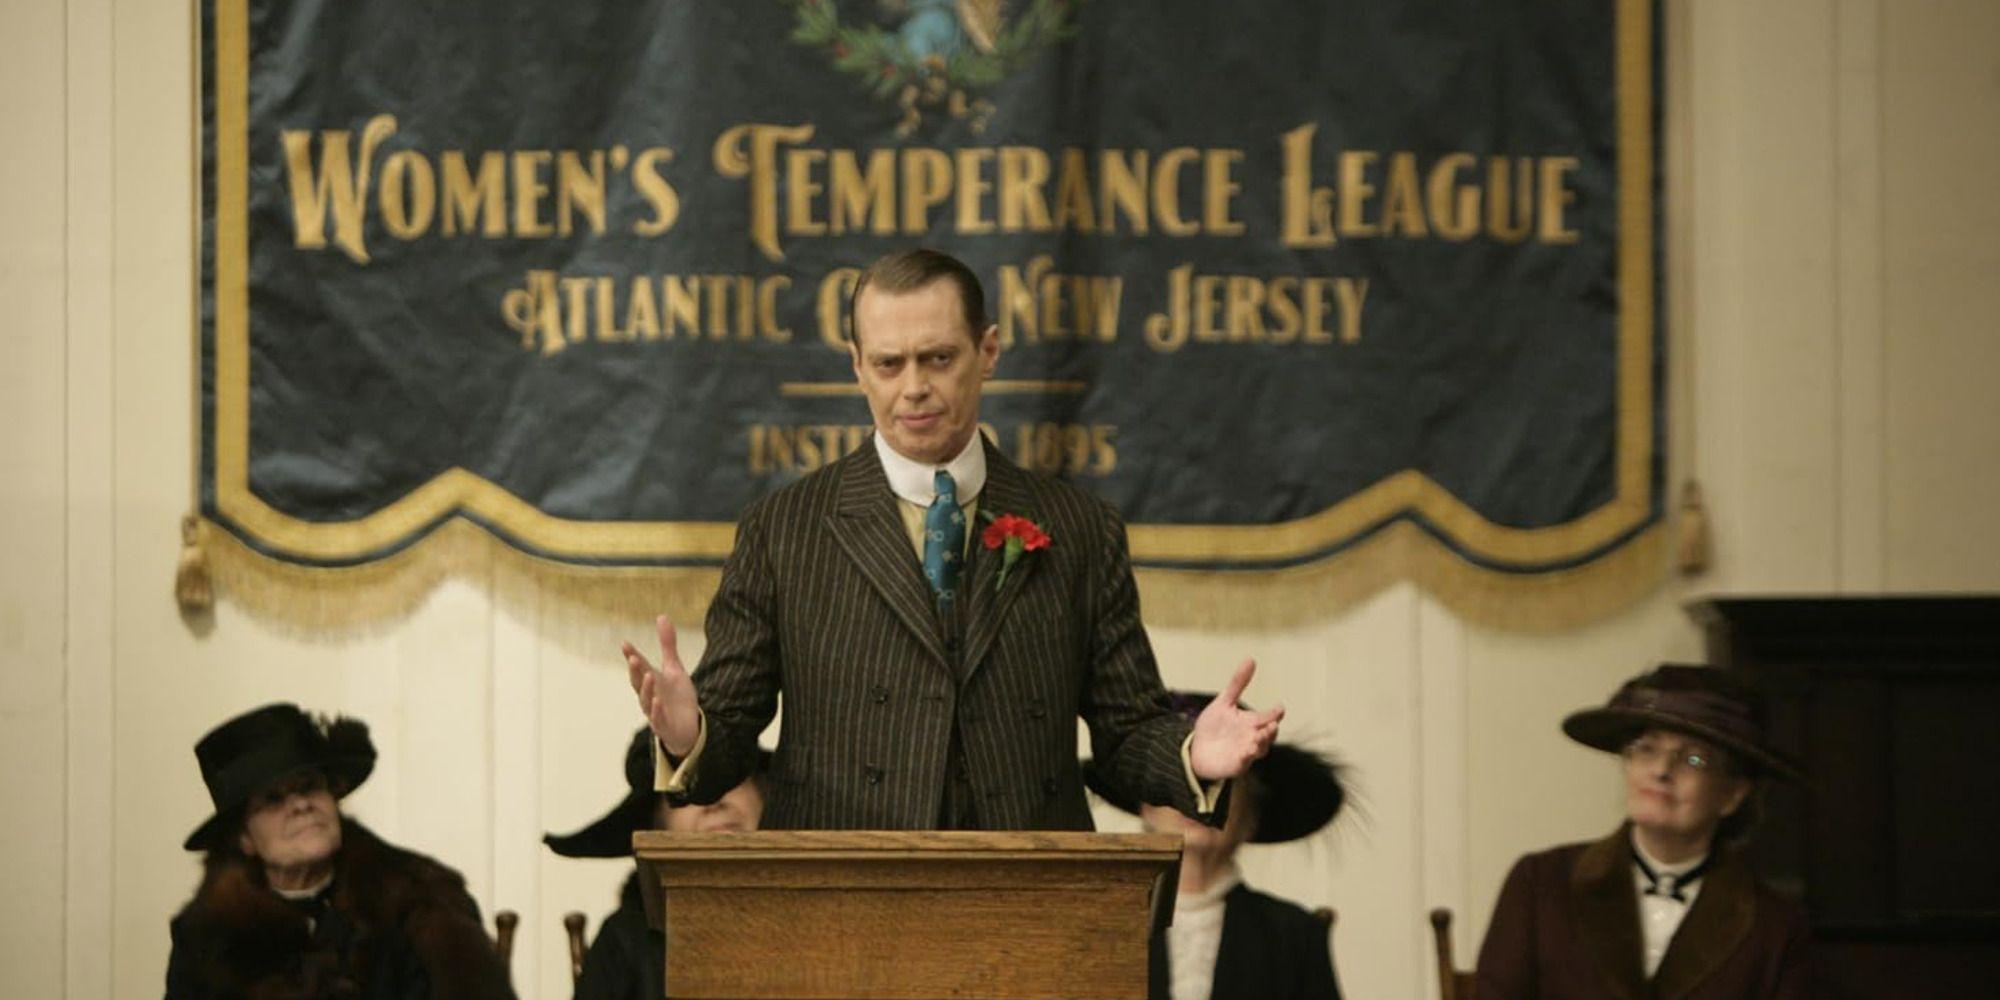 Nucky Thompson speaking at an assembly, wearing an elegant suit